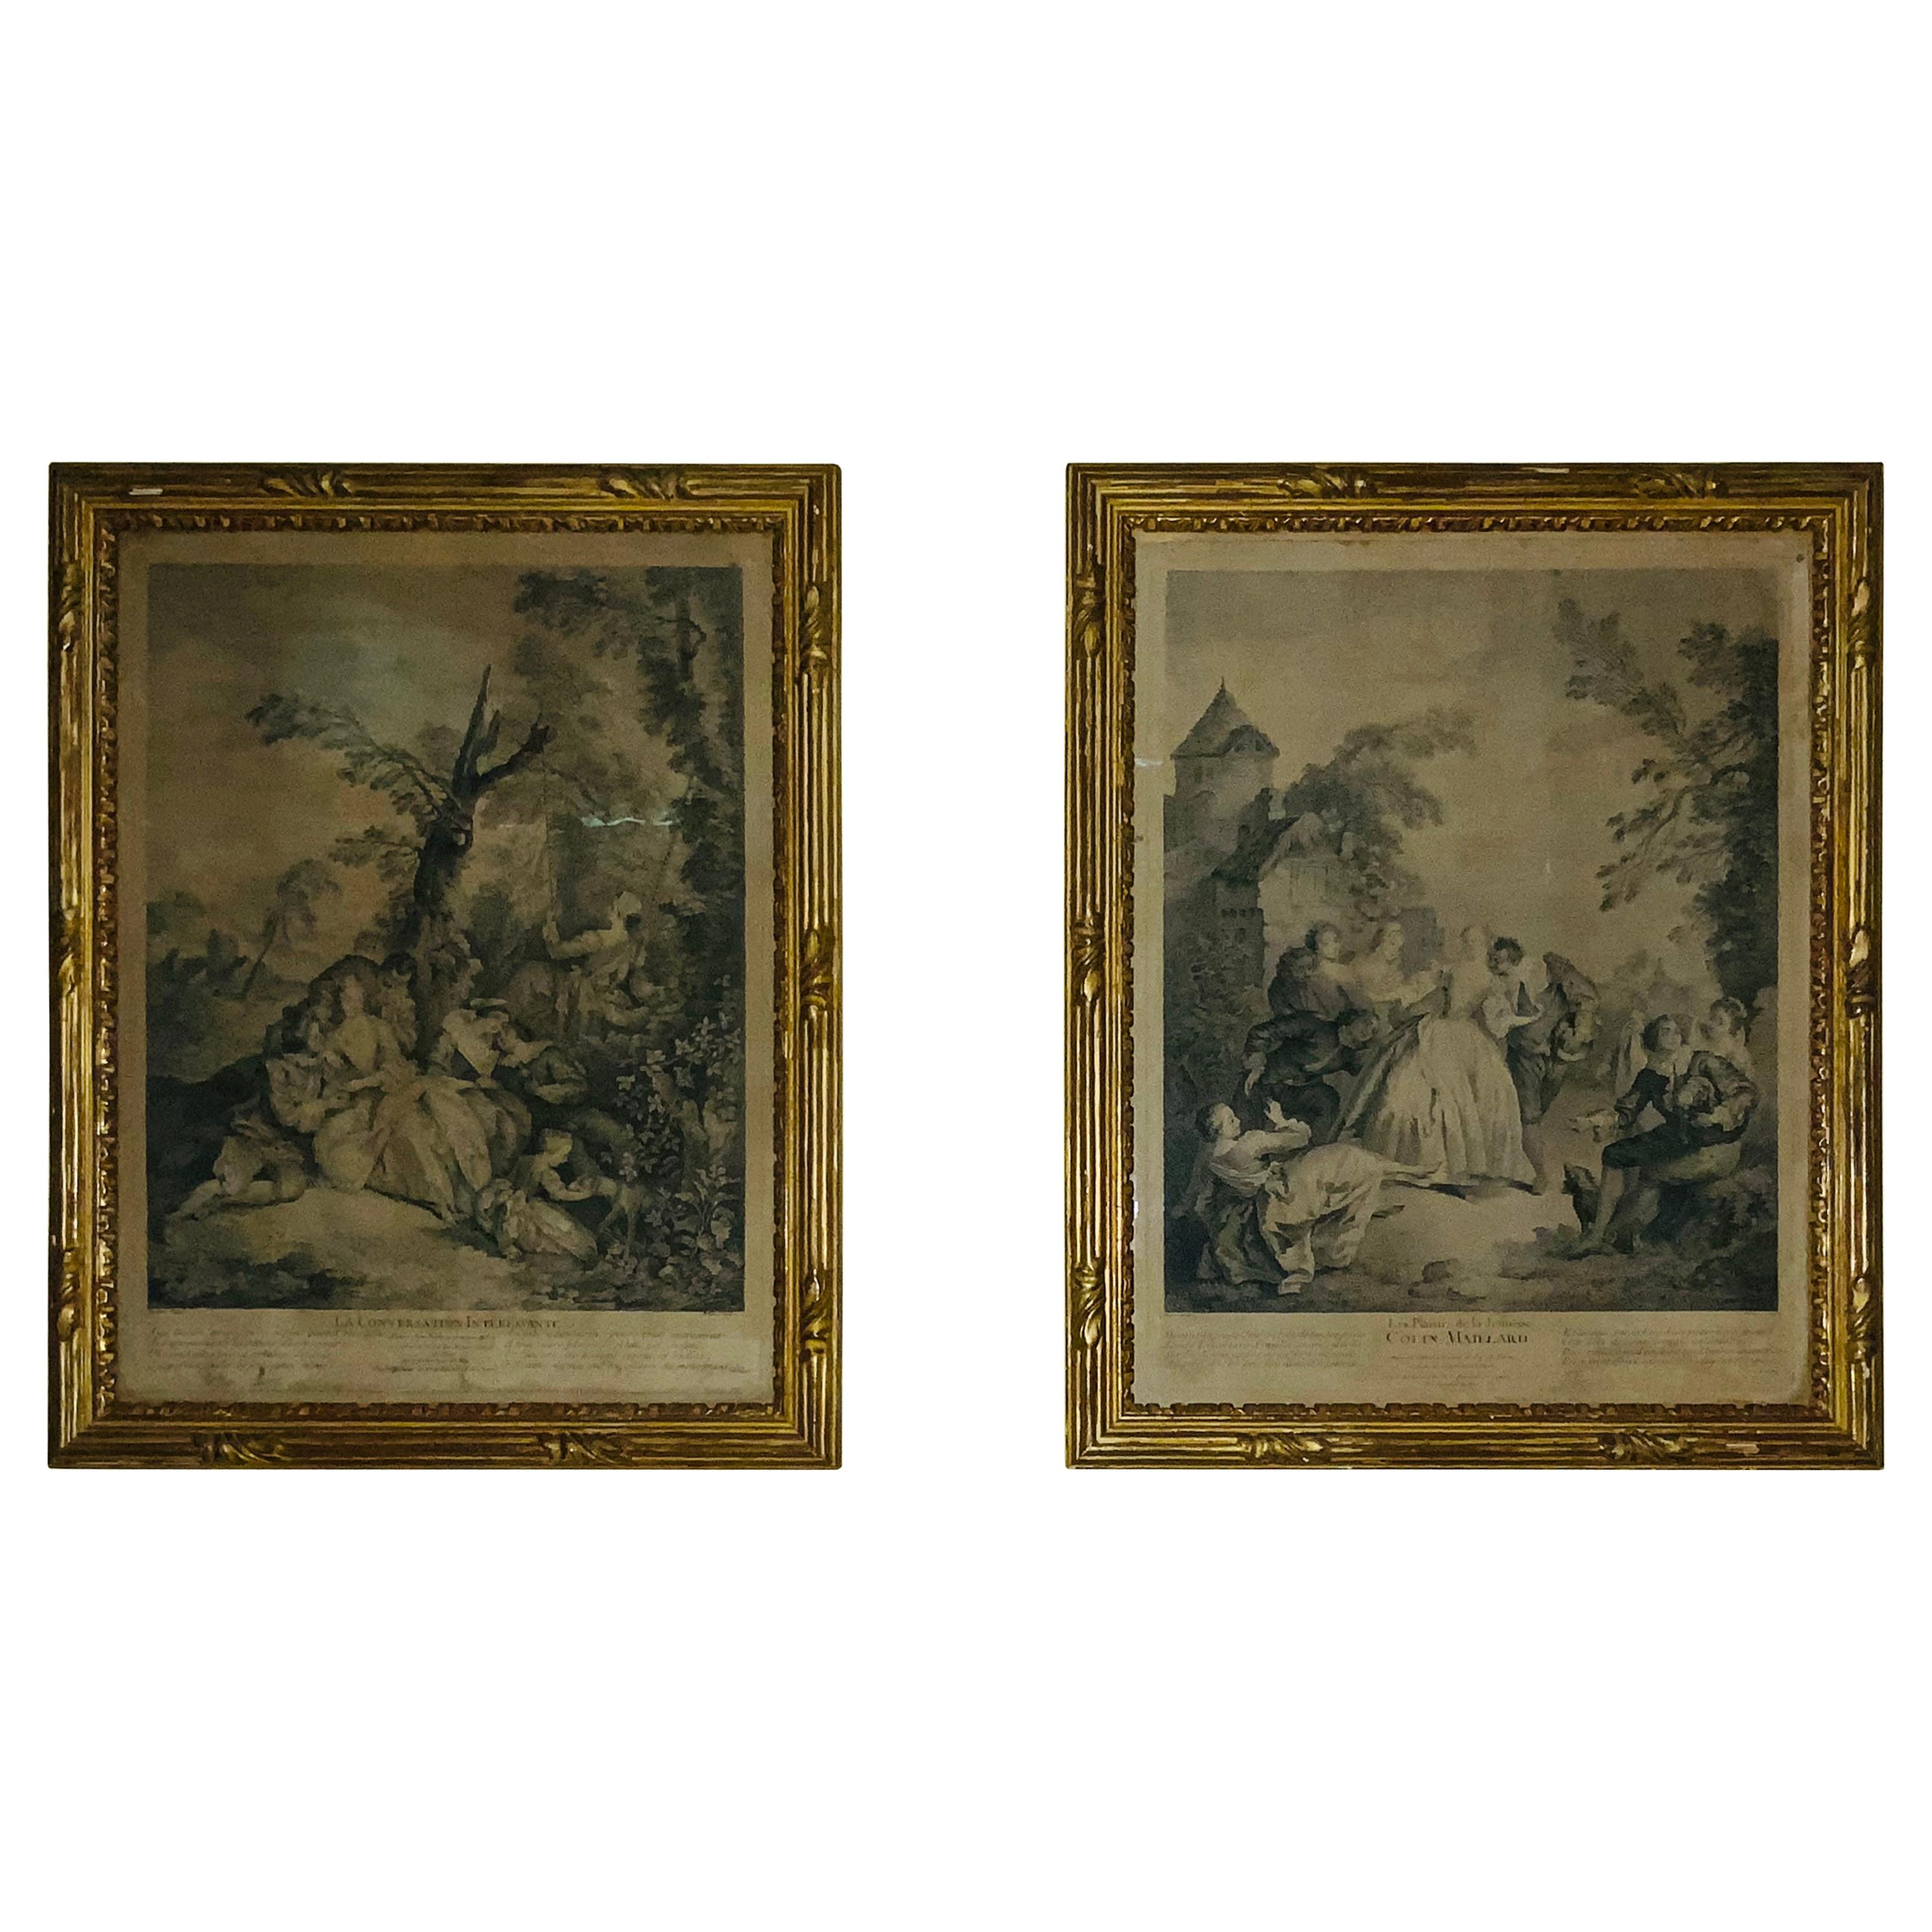 Set of Two Framed French Engraved Art Prints